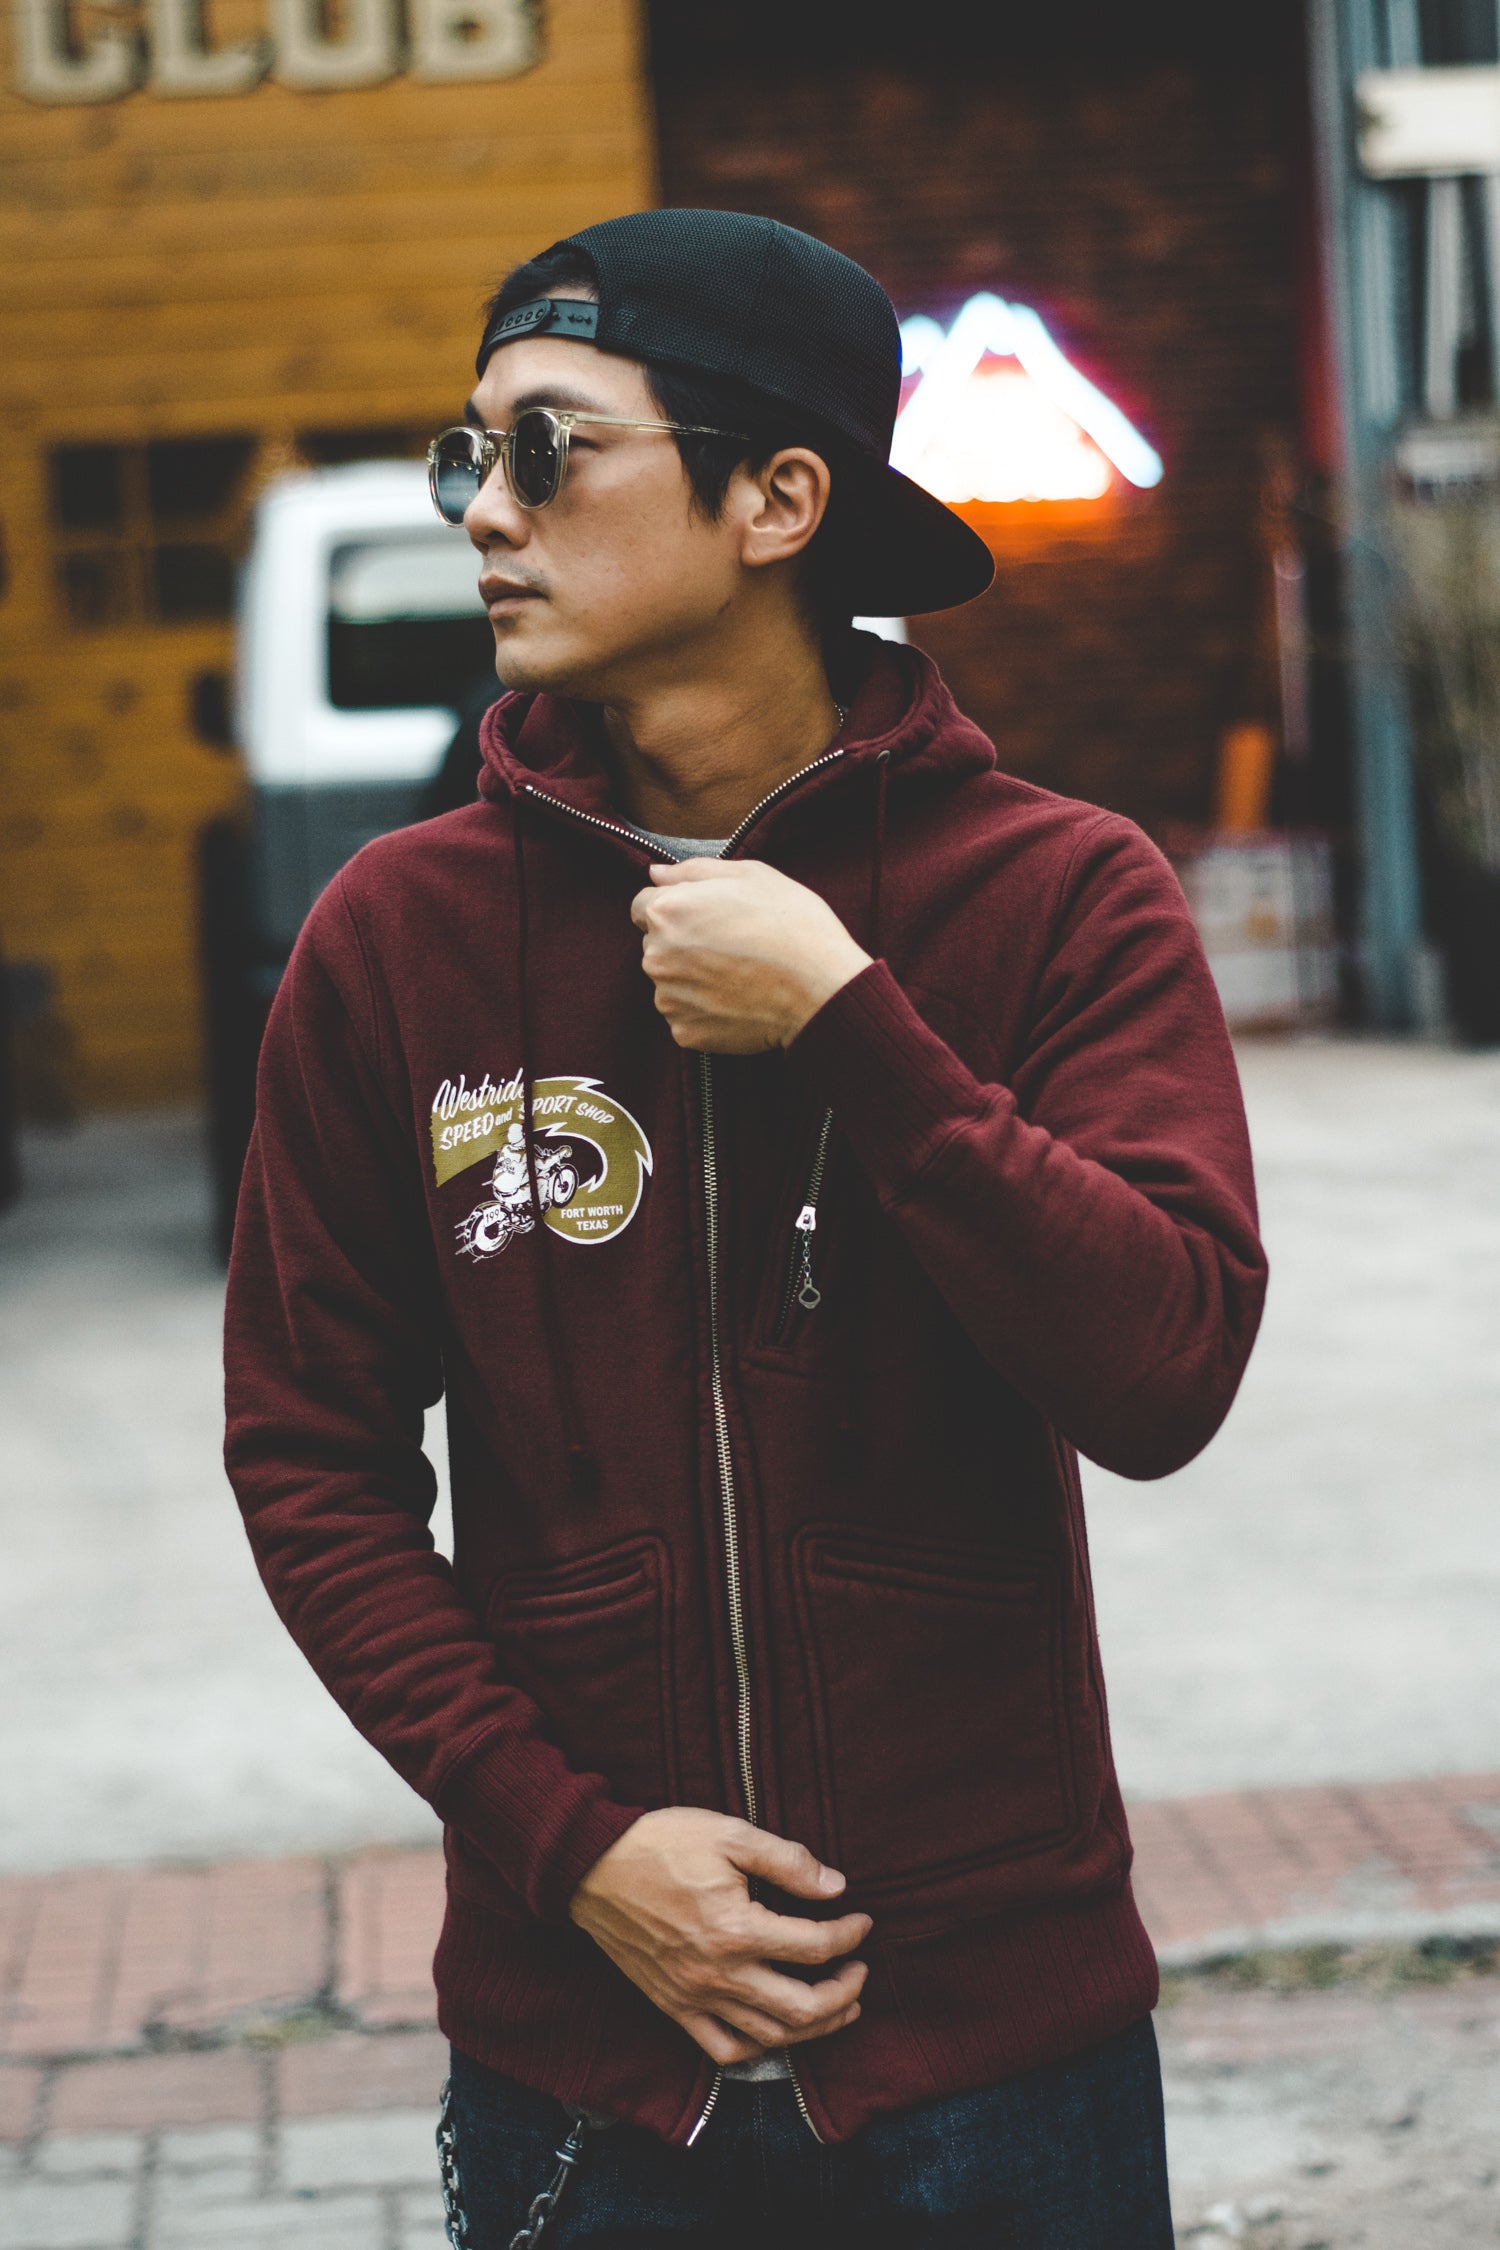 HEAVY WEIGHT FULL ZIP HOODIE - SPEED AND SPORT SHOP (WINE RED) - May club